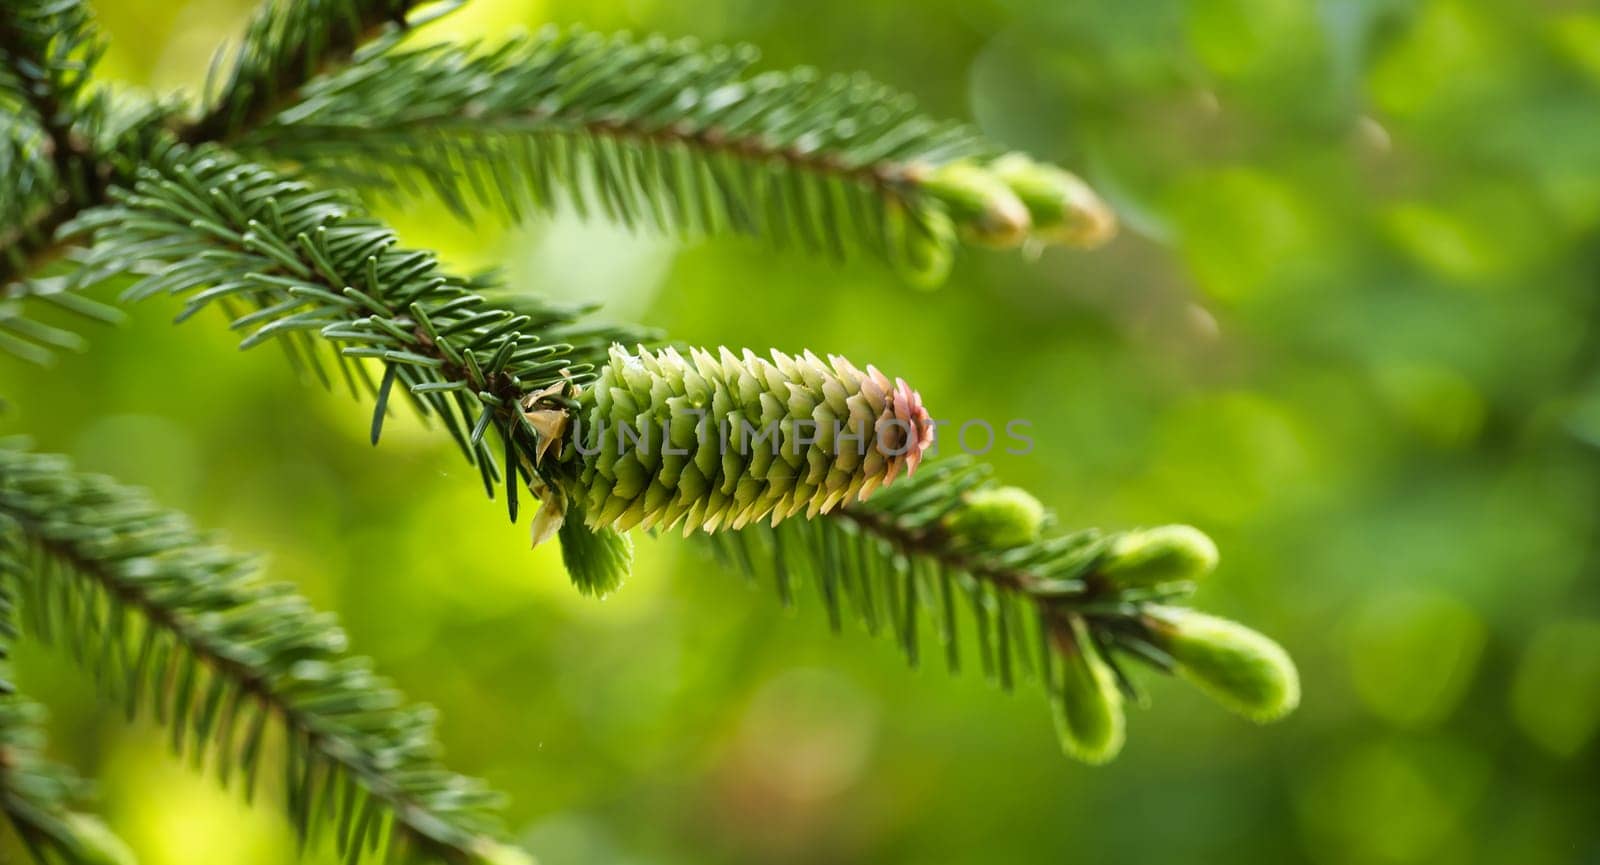 Close up of a green fir cone on a fir tree branch, young fir cone showing a green hue with hints of pink at its tips